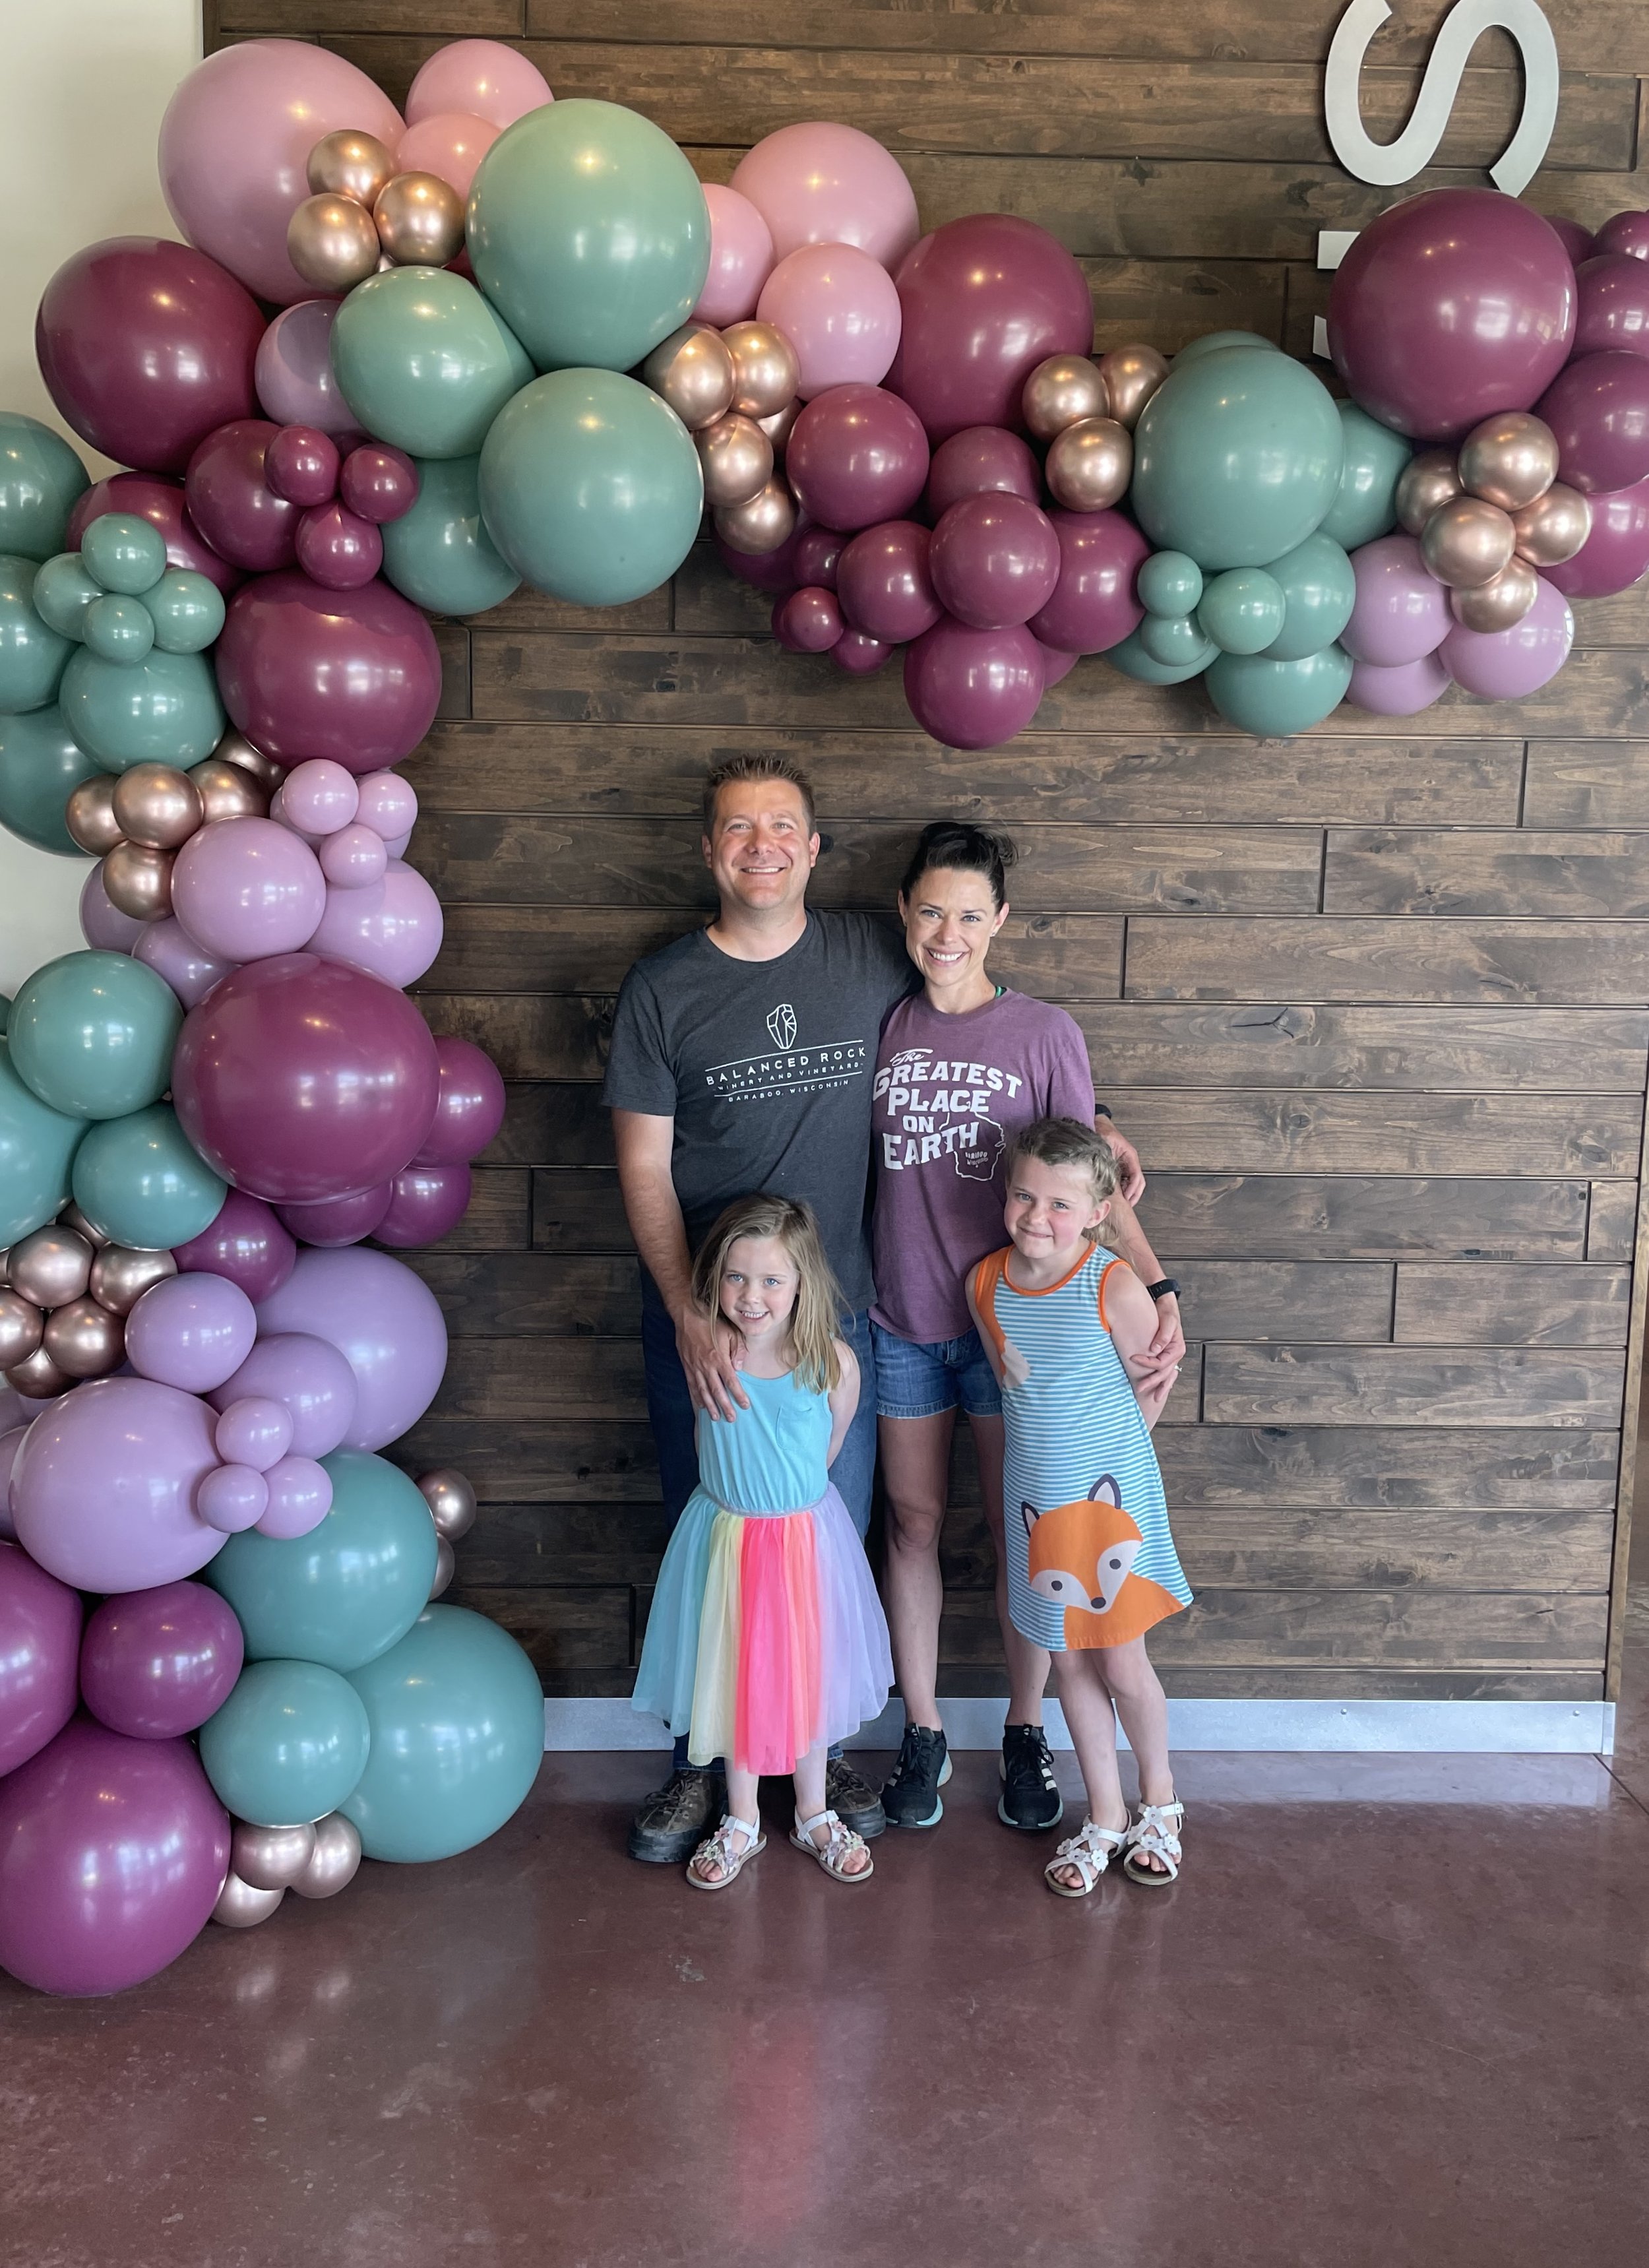  Balanced Rock owners, Matt and Kristin Boegner with their children.  